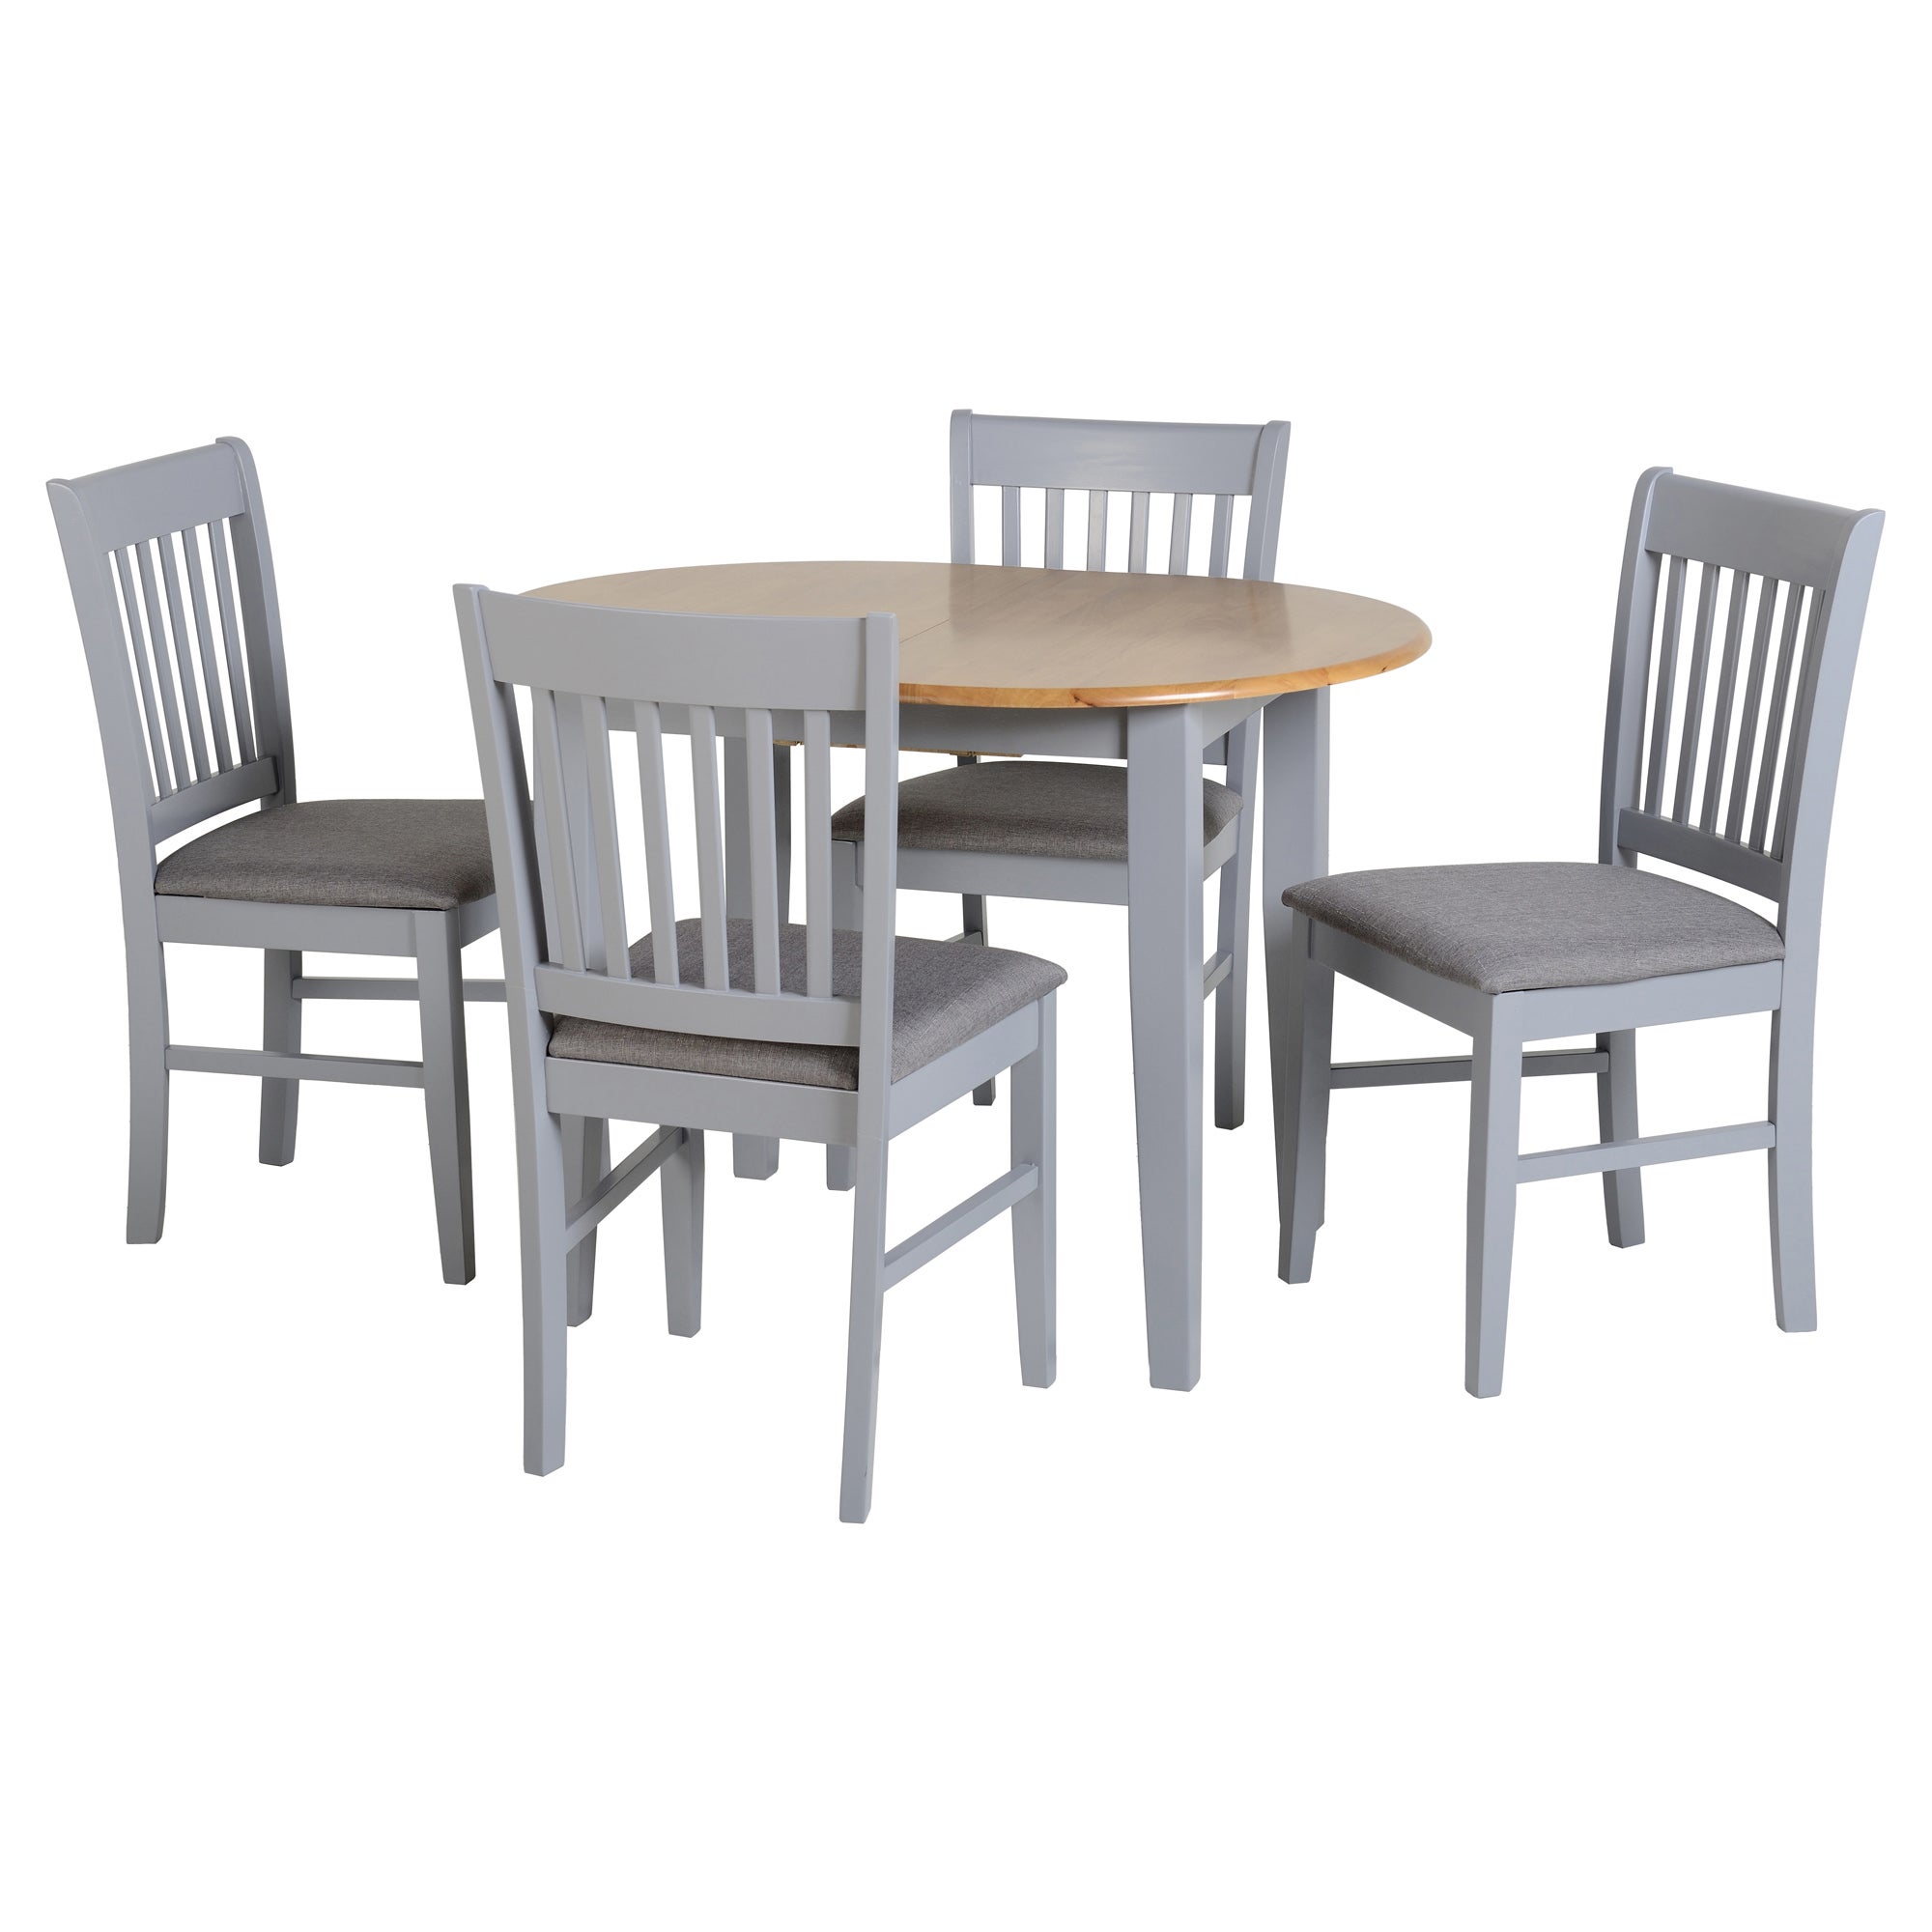 Oxford Oval Extendable Dining Table With 4 Chairs Grey Grey